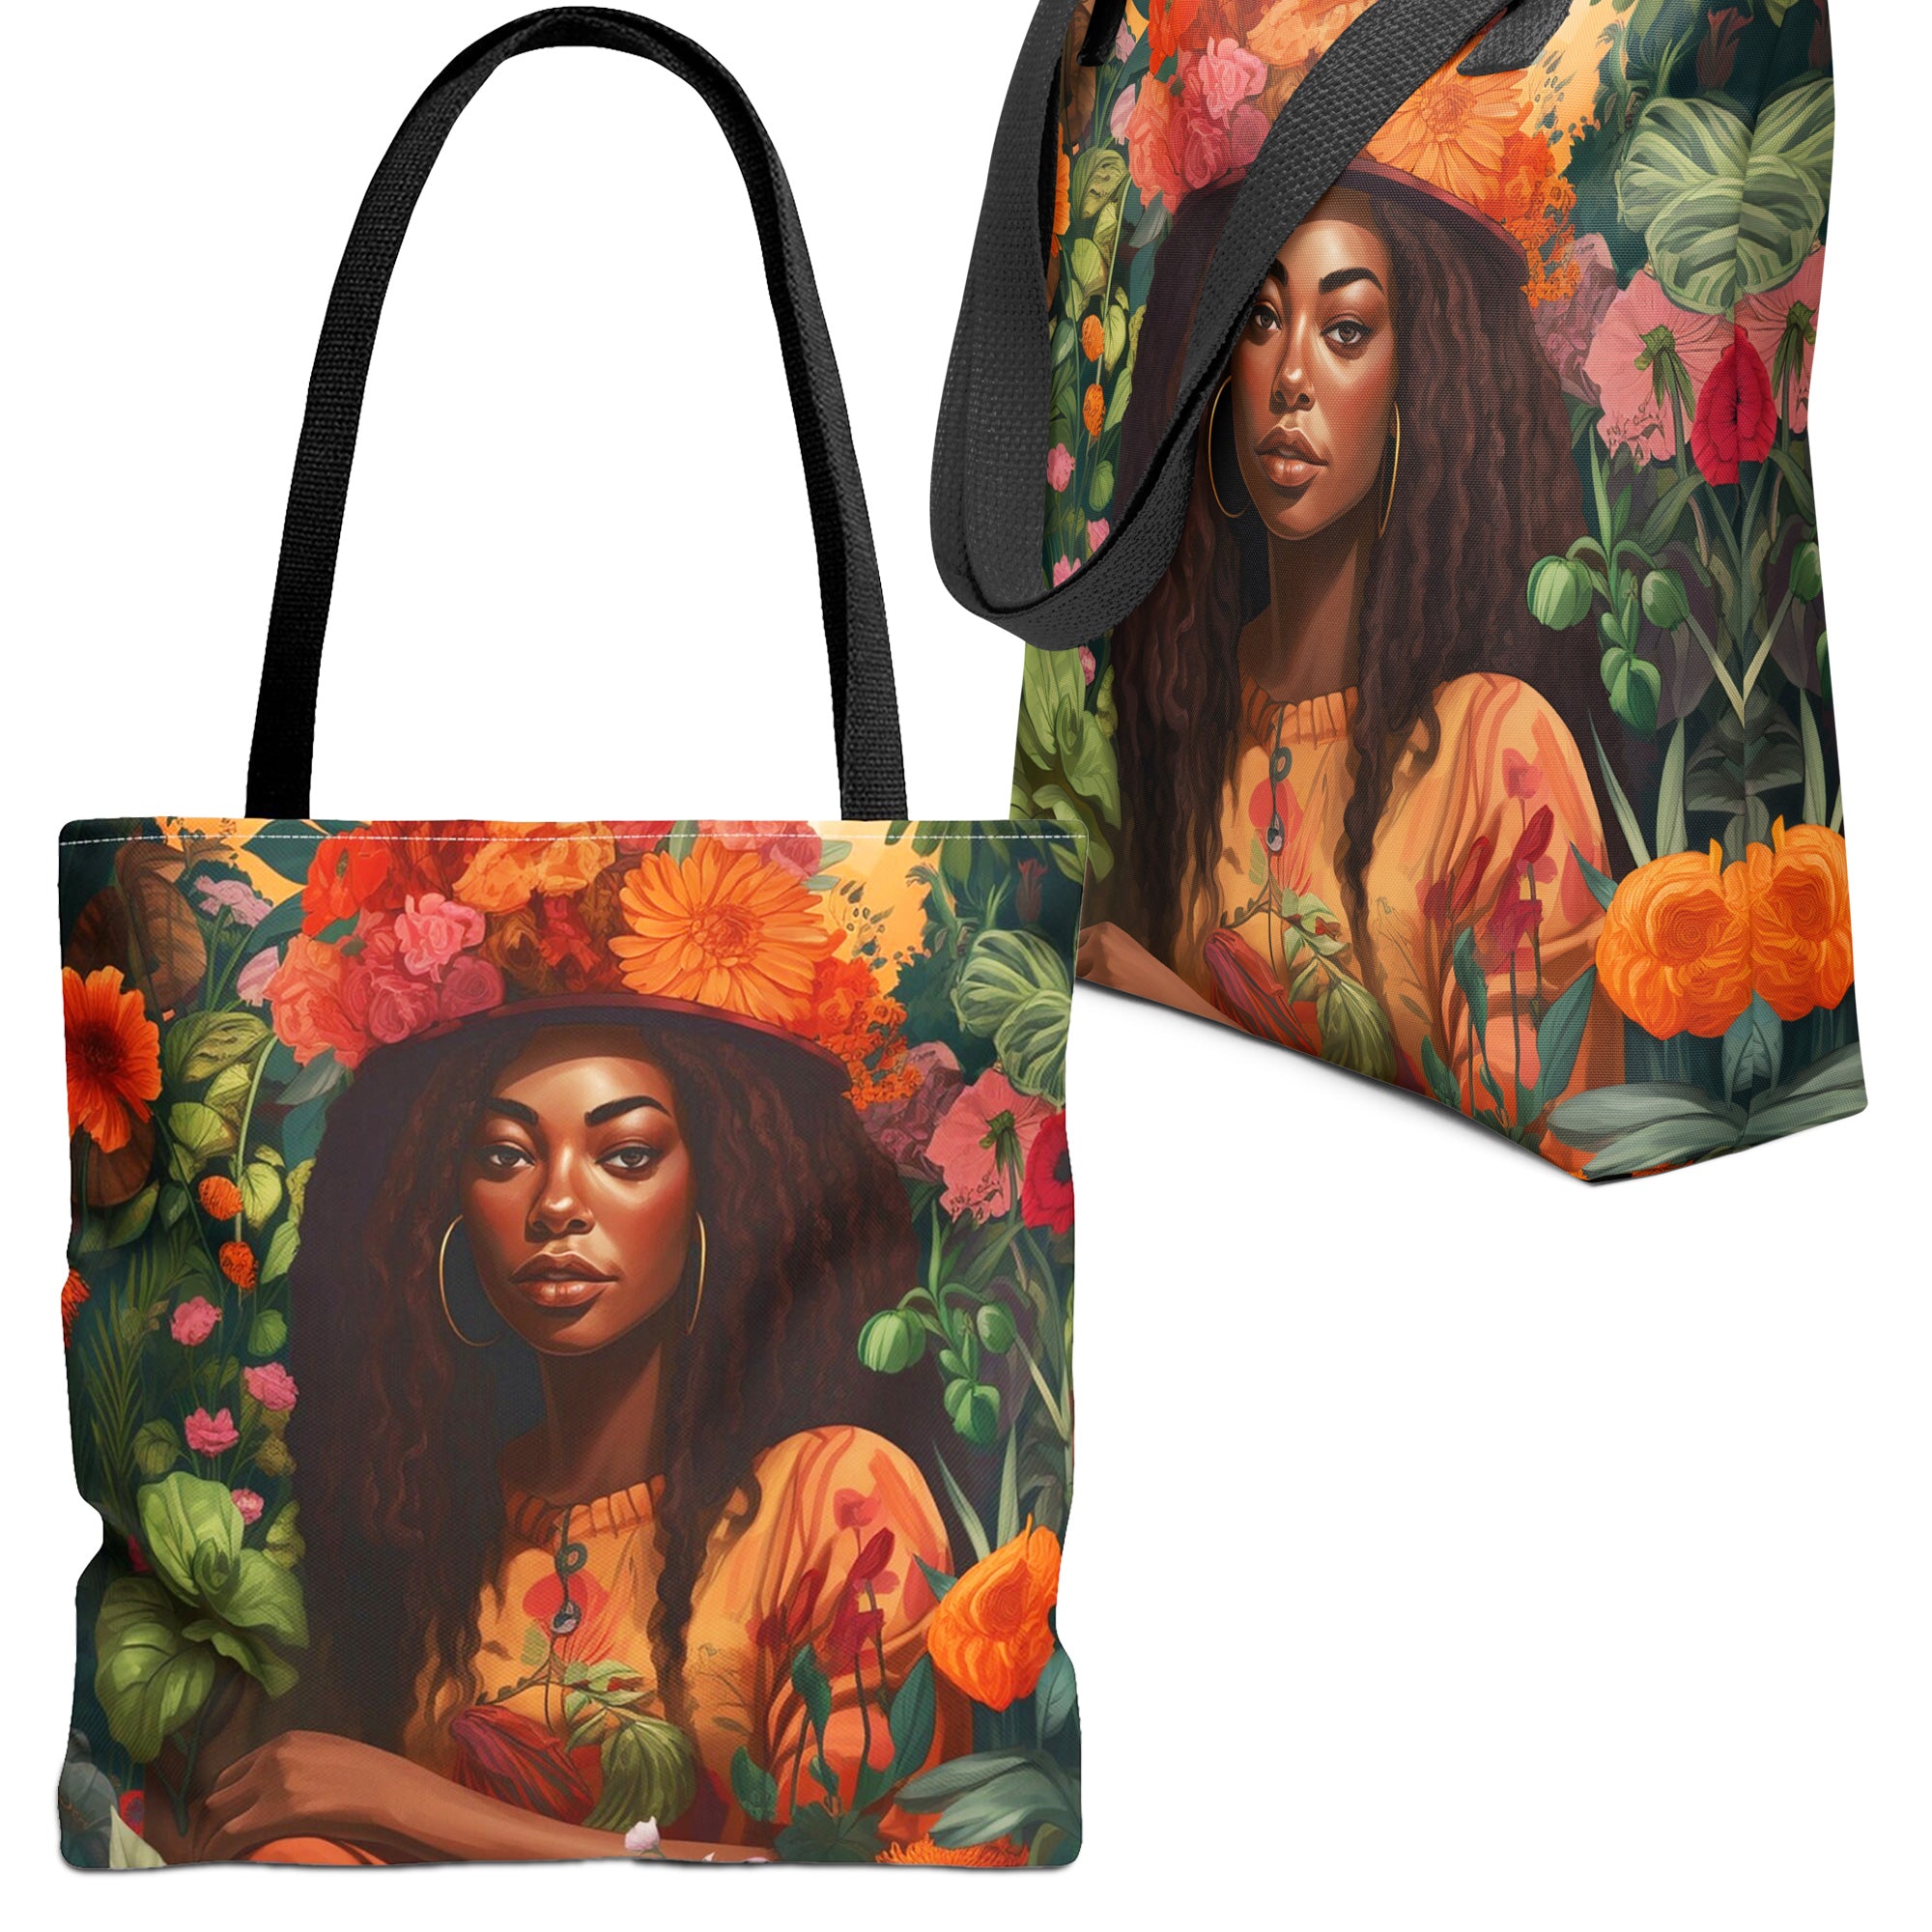 African American Garden Goddess Tote Bag - front and side views.